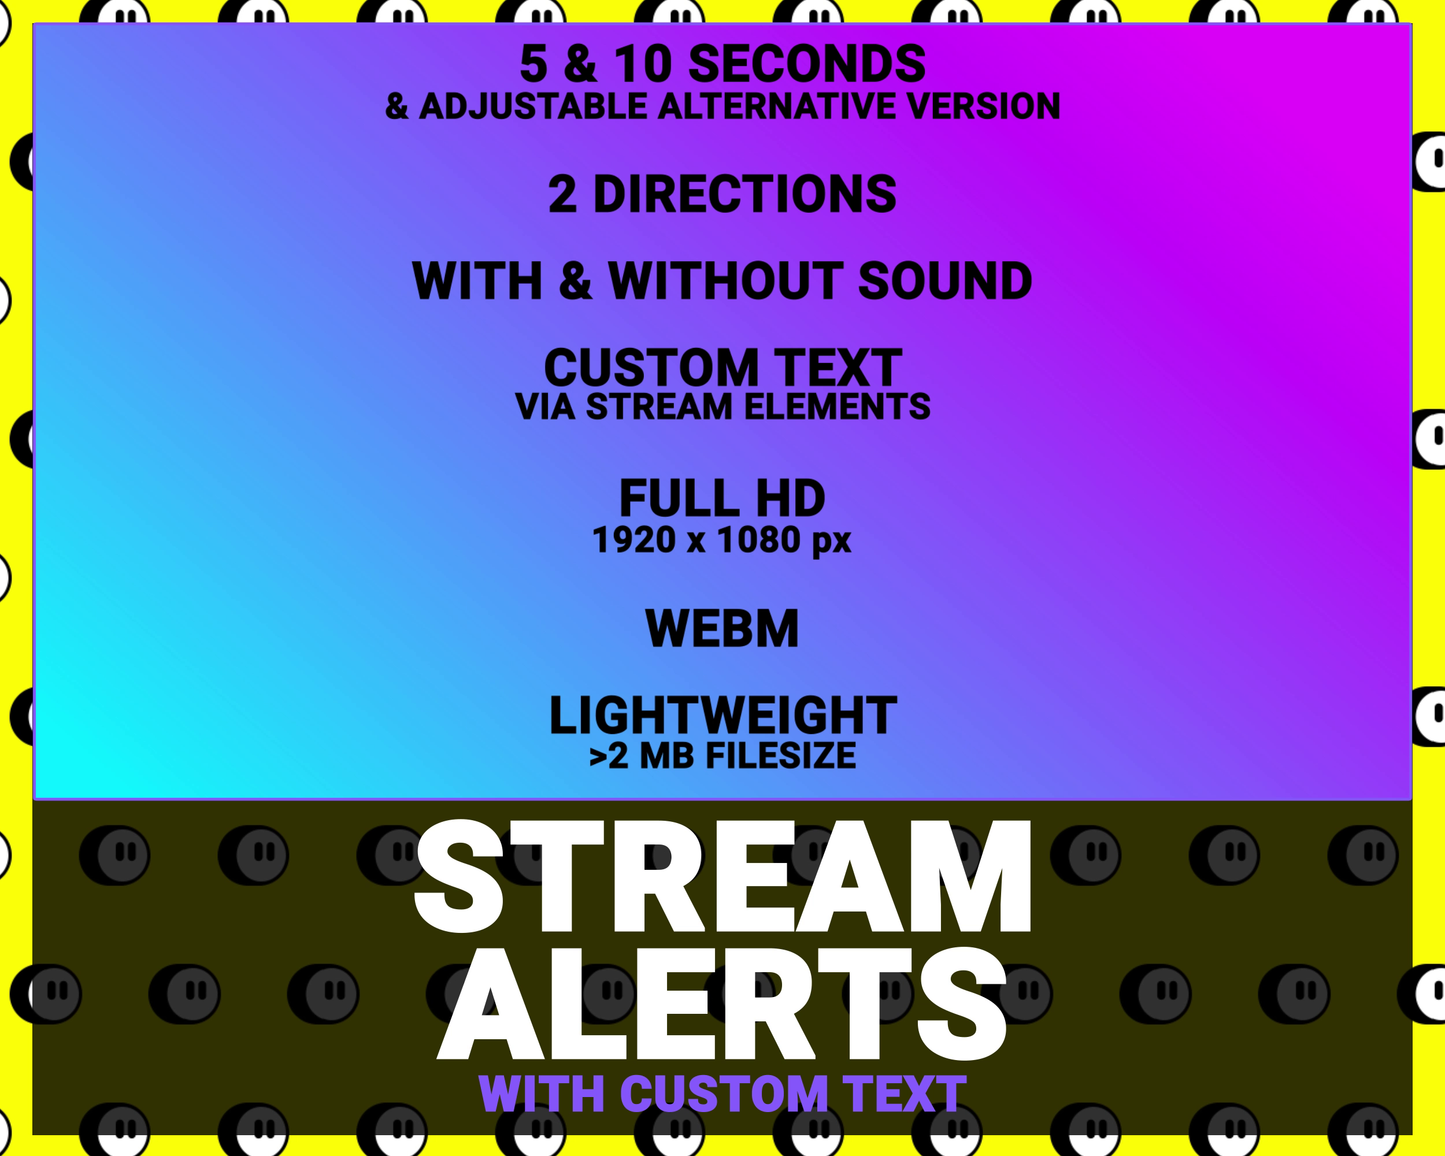 Meteor Stream Alerts with Custom Text